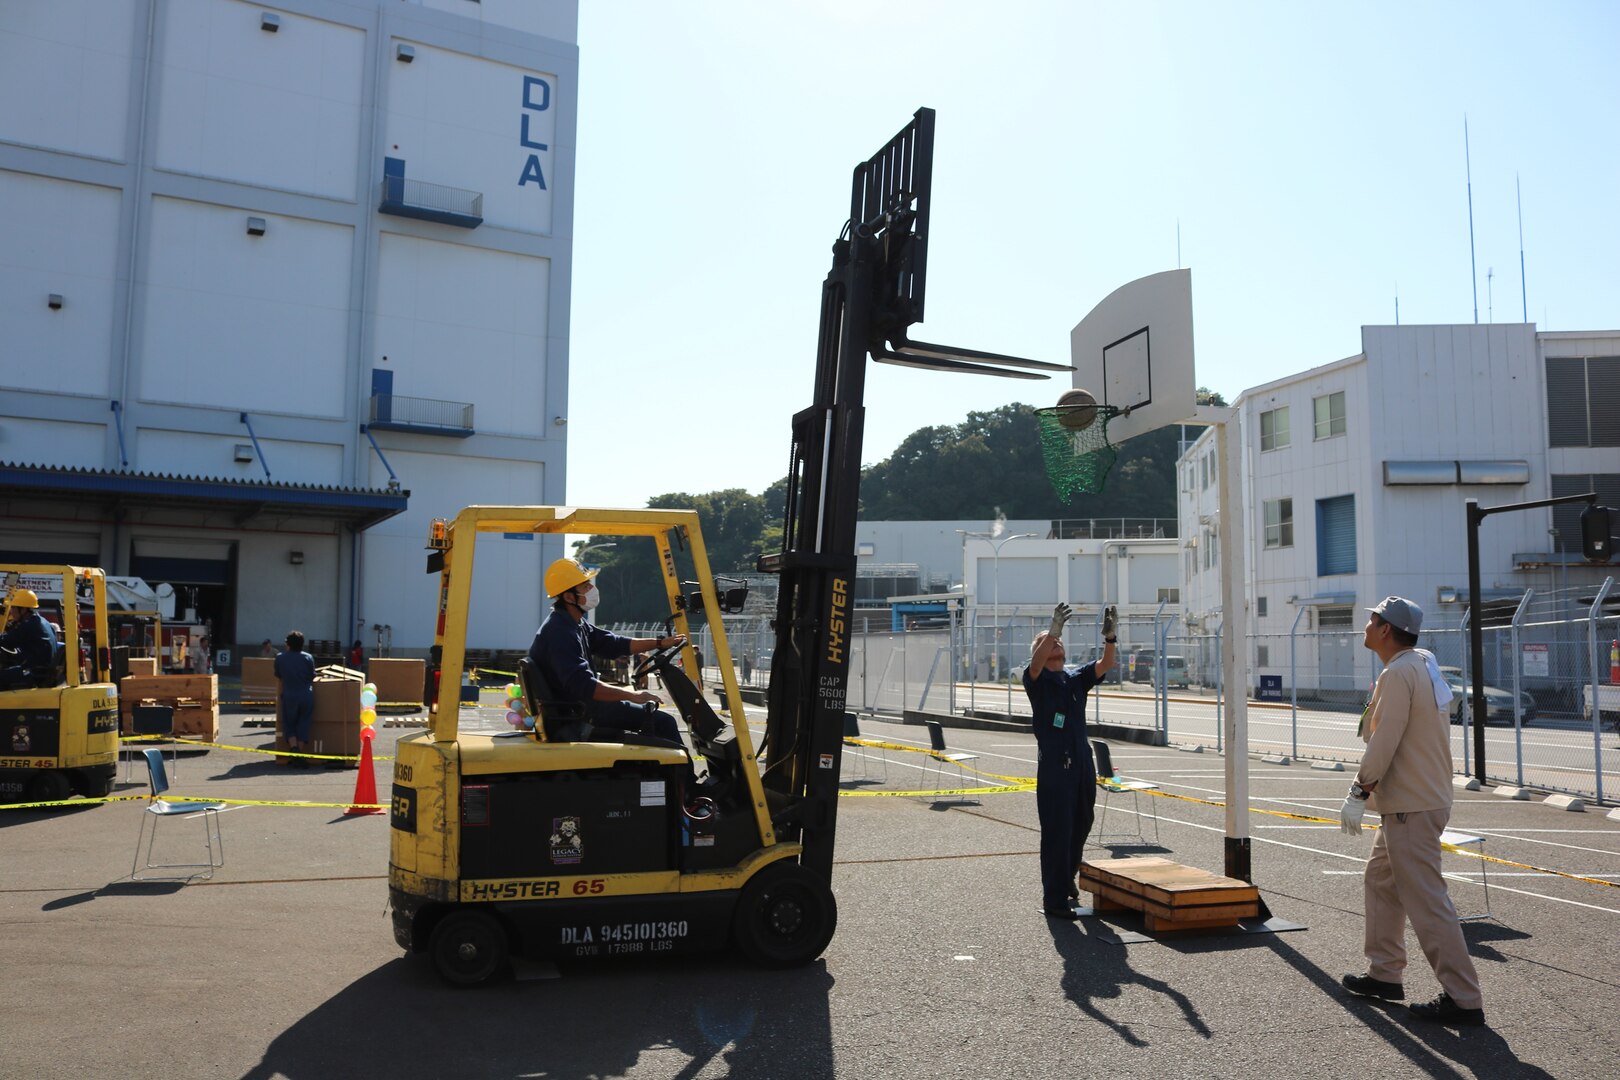 Participants use a forklift to shoot a basketball through a hoop during DLA Distribution Yokosuka's annual Forklift Rodeo.